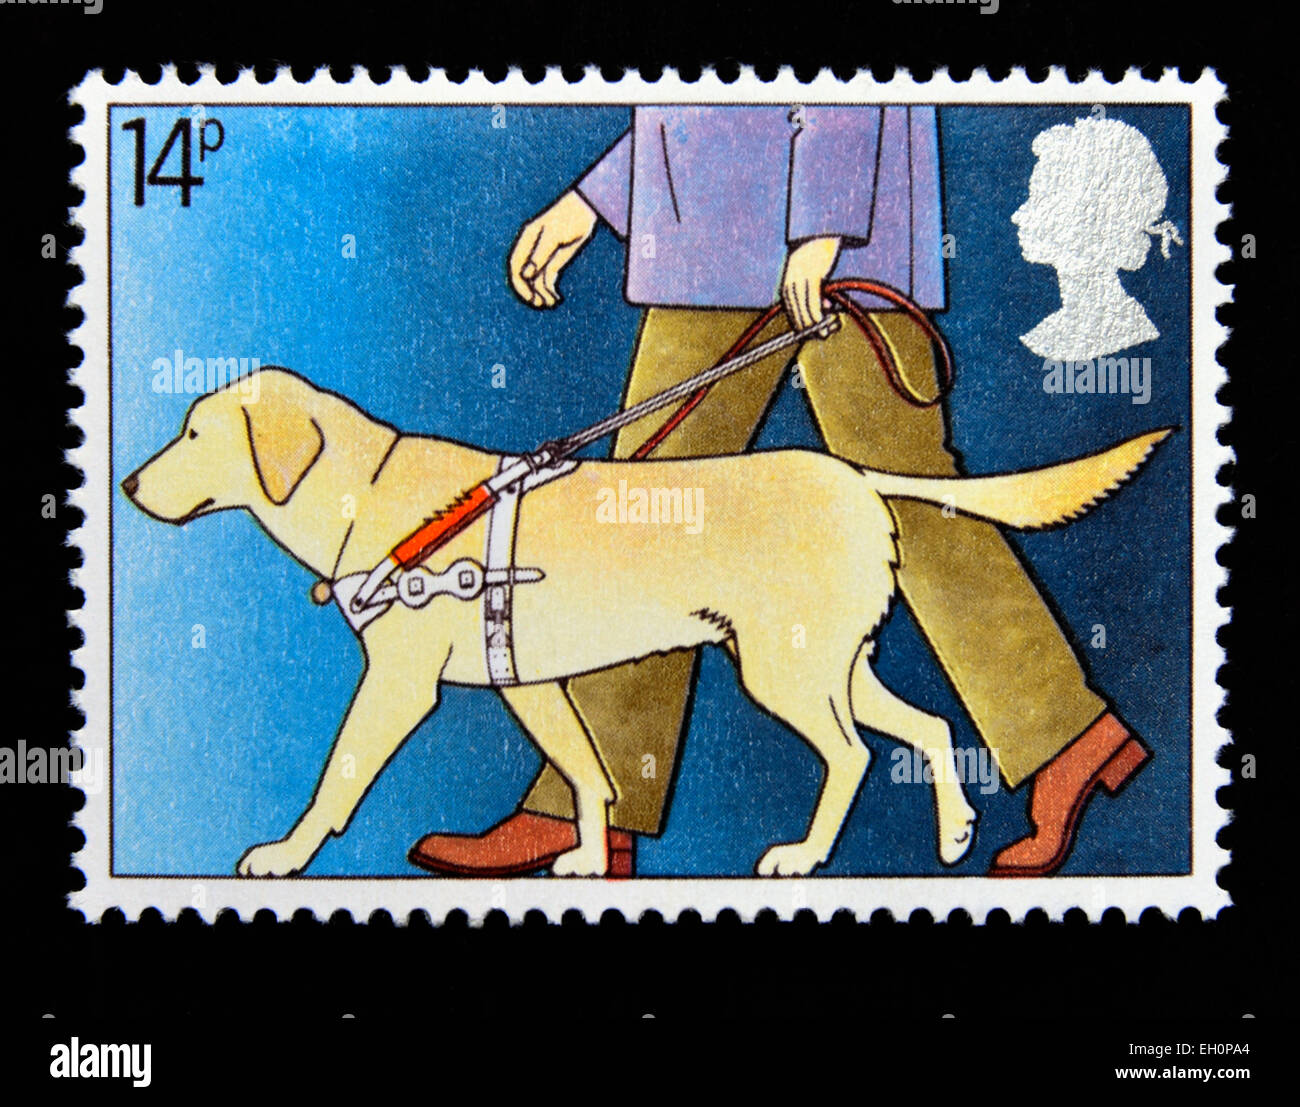 Where to buy stamps  Guide to buying stamps online